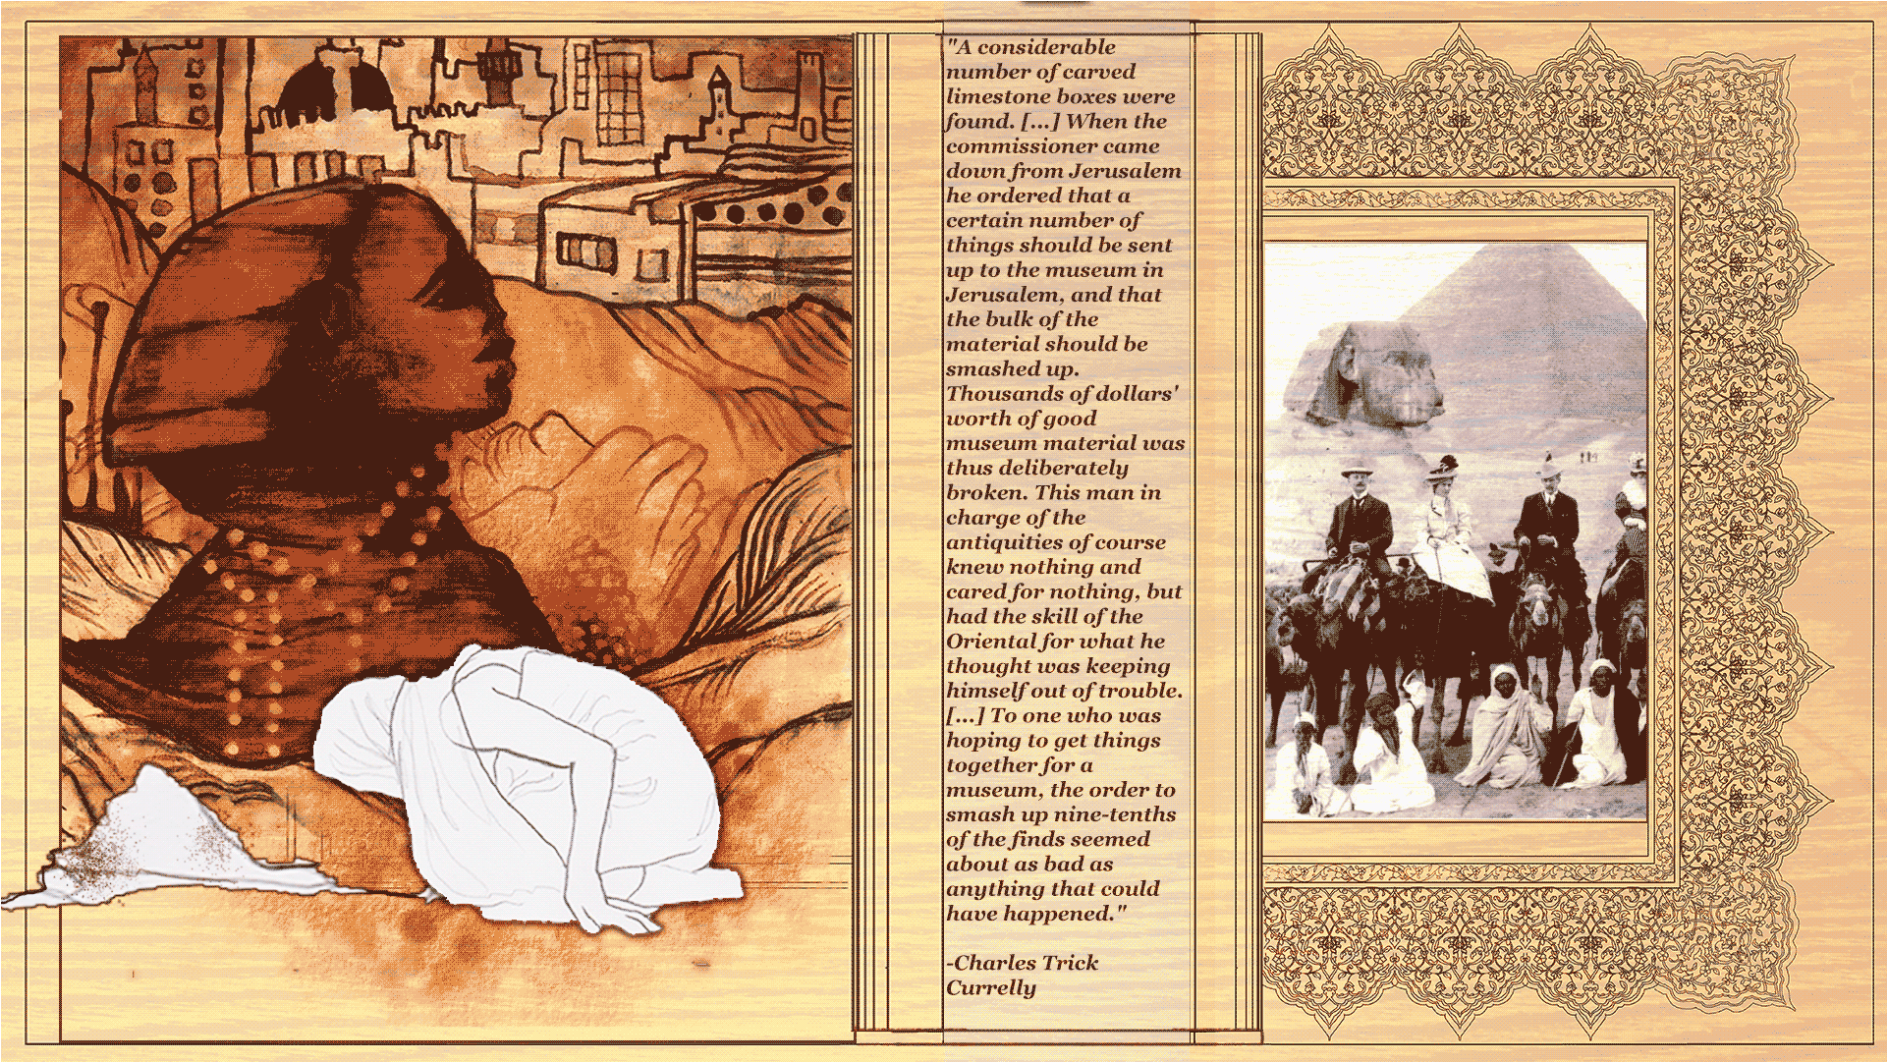 two images next to each other, one the left a drawn image of the sphinx with a women with hijab bowing in the foreground, behind the sphinx a residential landscapes, older houses, on the right an archival image of British officals wiomen and men on horses, workers of egyptian sitting on the sand, behind them pyramids, in hte middle of both images text. 